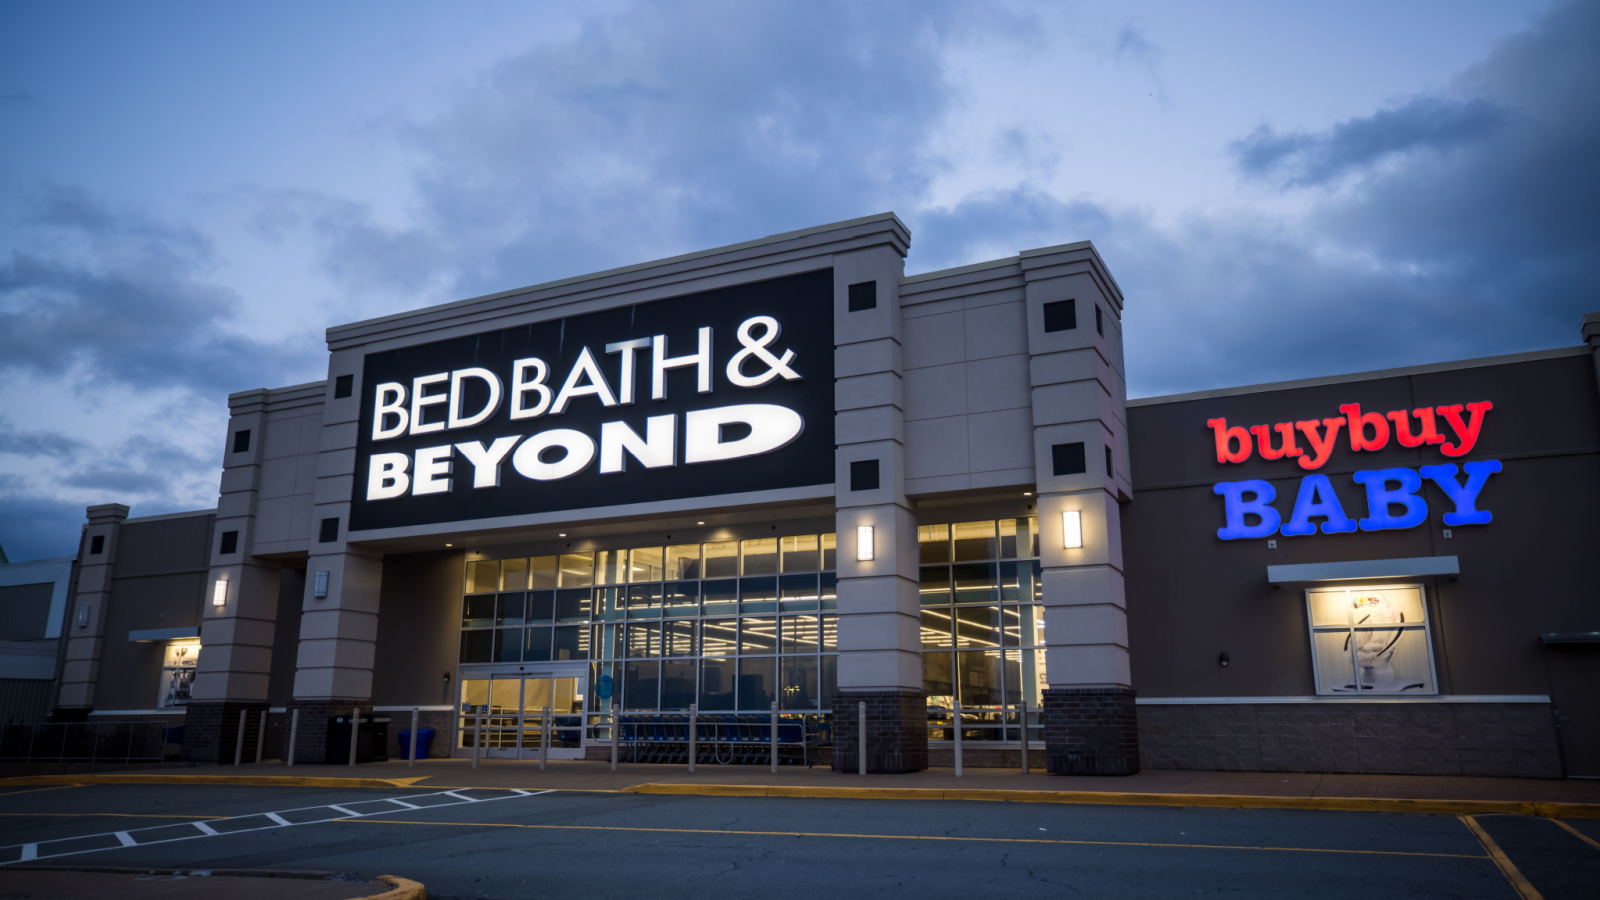 BED BATH BEYOND (BBBY) Storefront. An American chain of domestic merchandise retail stores for Bedding, Baths, Cookware, Fine China, Wedding, Gifts